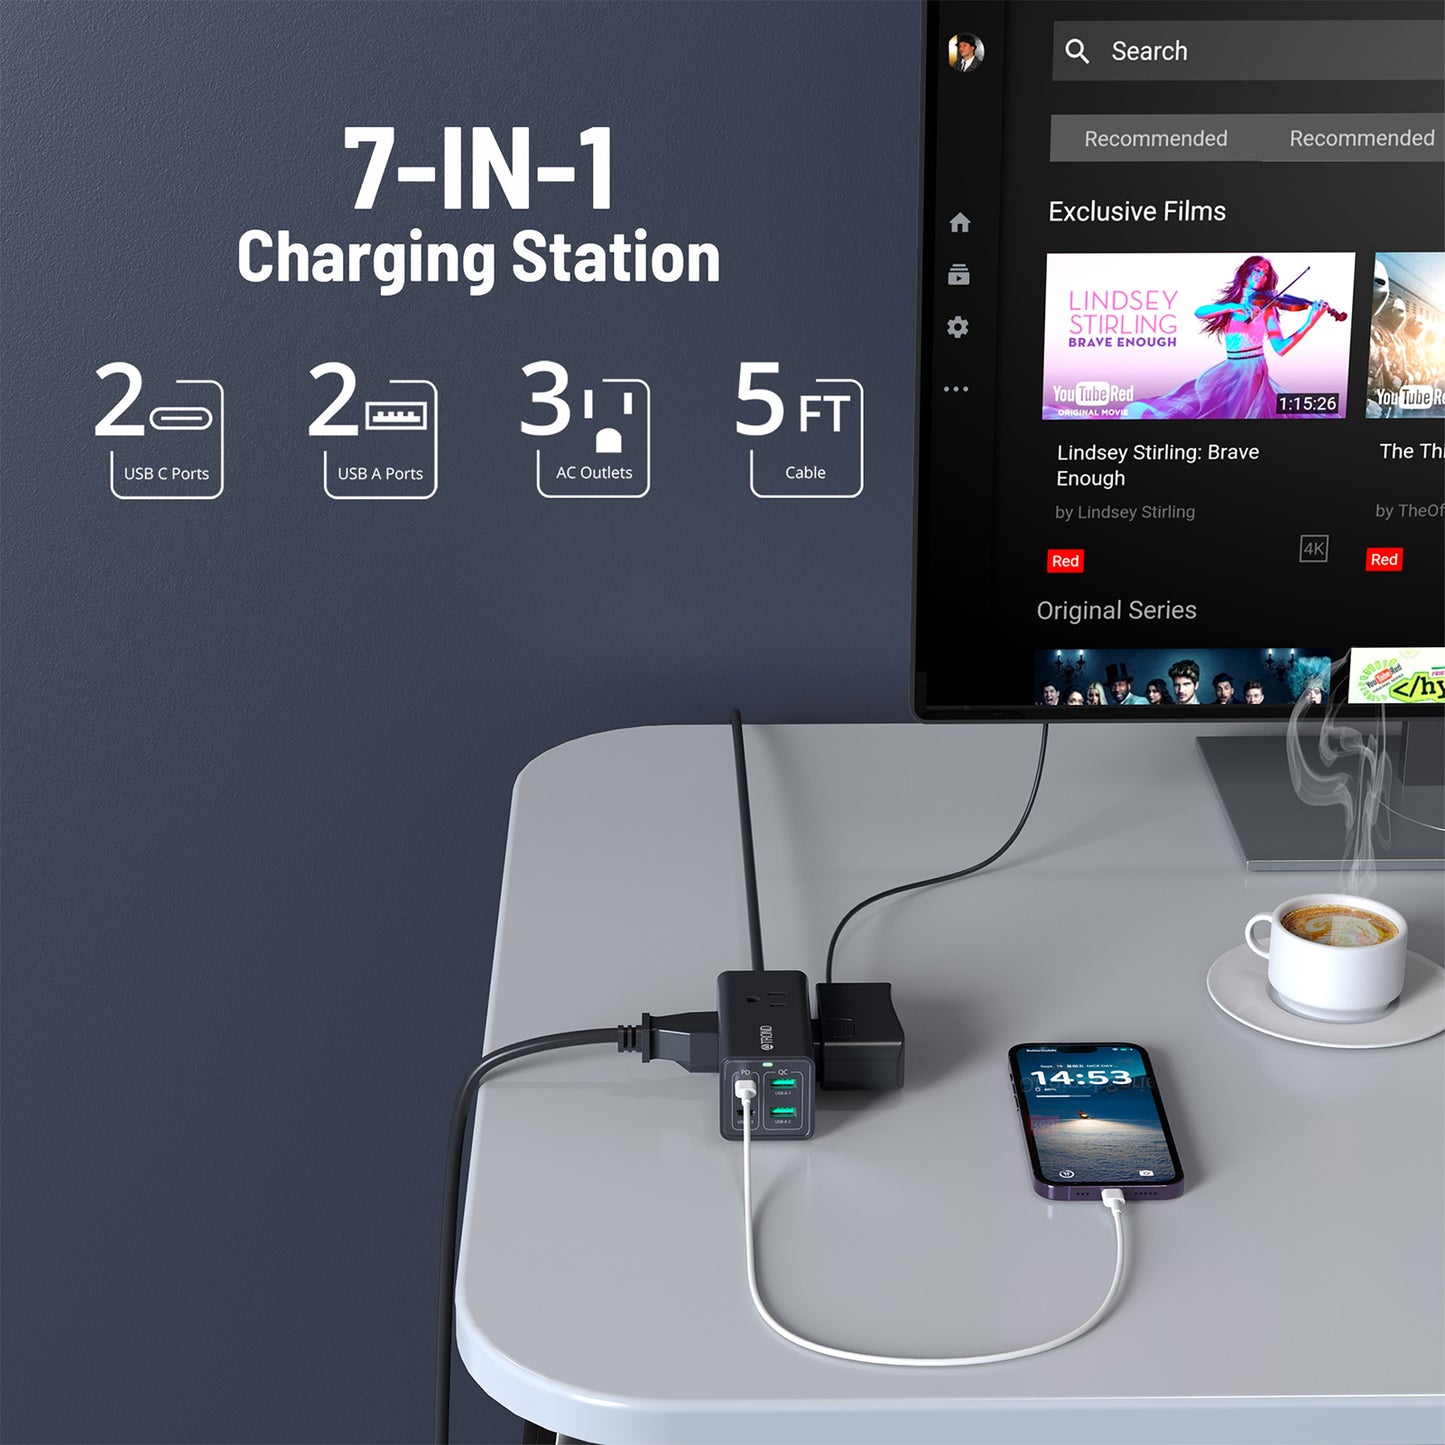 TROND USB C Charger, 65W USB C Charging Station Desktop Power Strip for Travel and Work